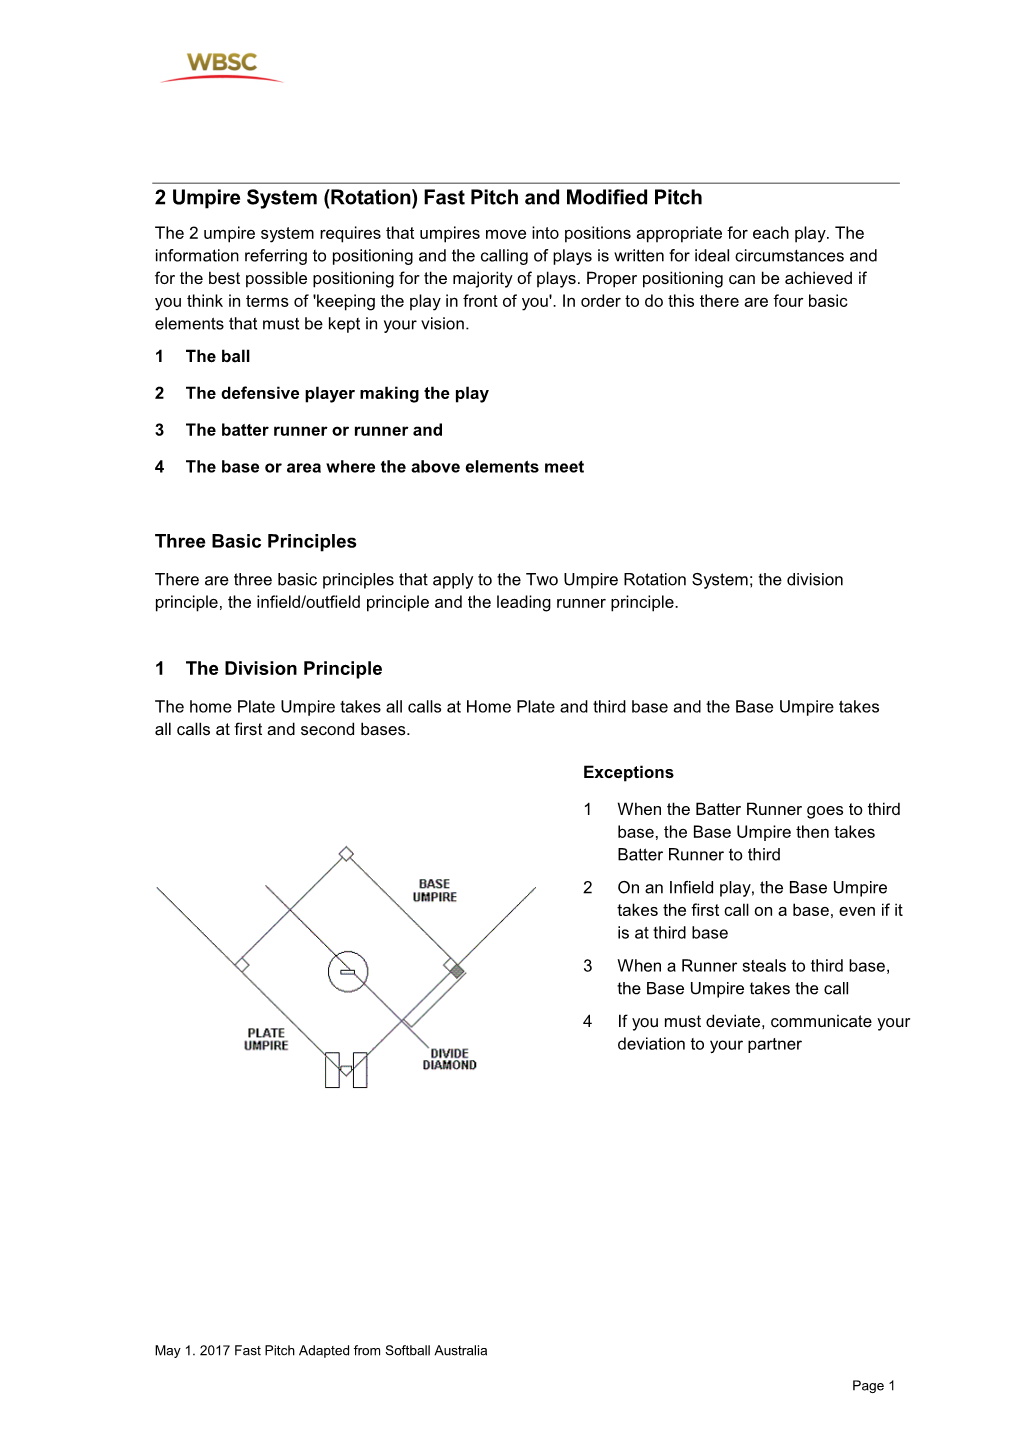 2 Umpire System (Rotation) Fast Pitch and Modified Pitch the 2 Umpire System Requires That Umpires Move Into Positions Appropriate for Each Play